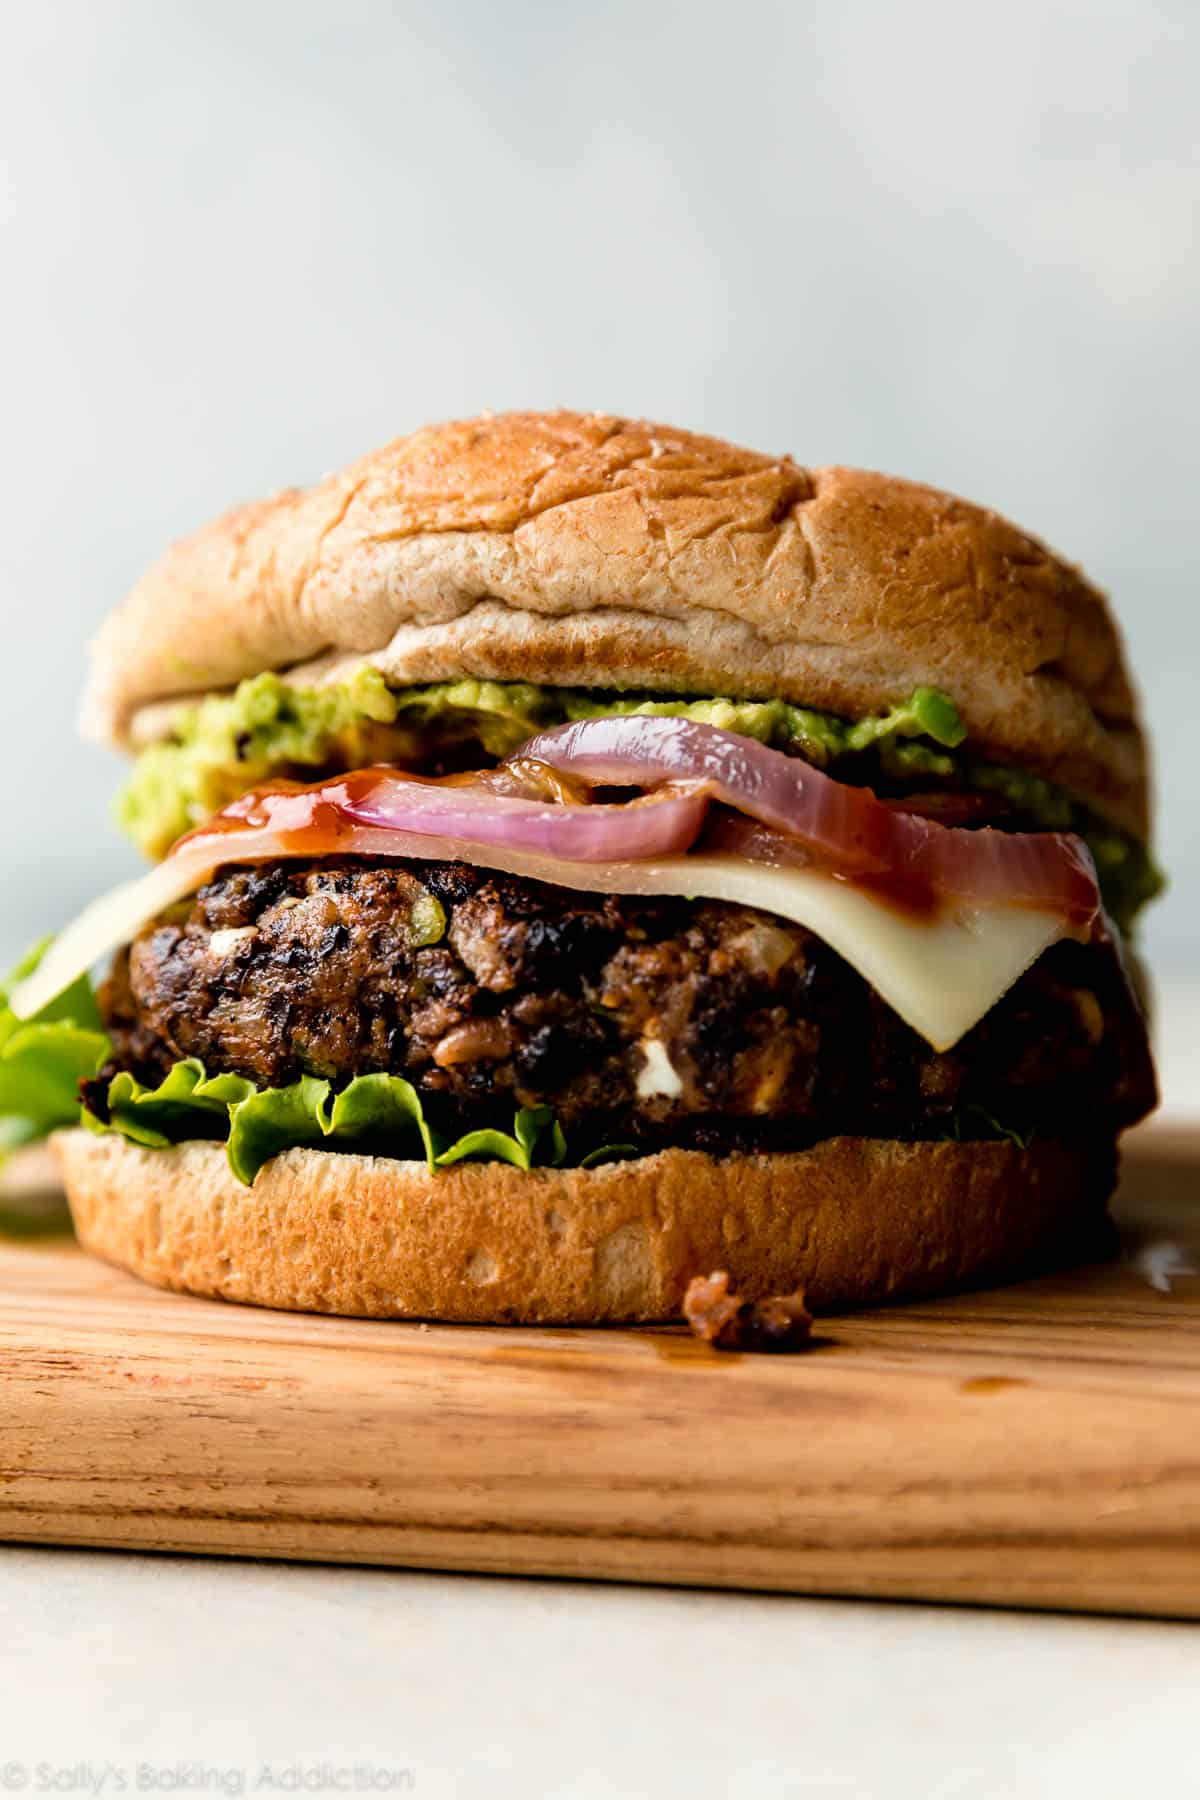 Black Bean Burger with Cheese, Onions and Guacamole